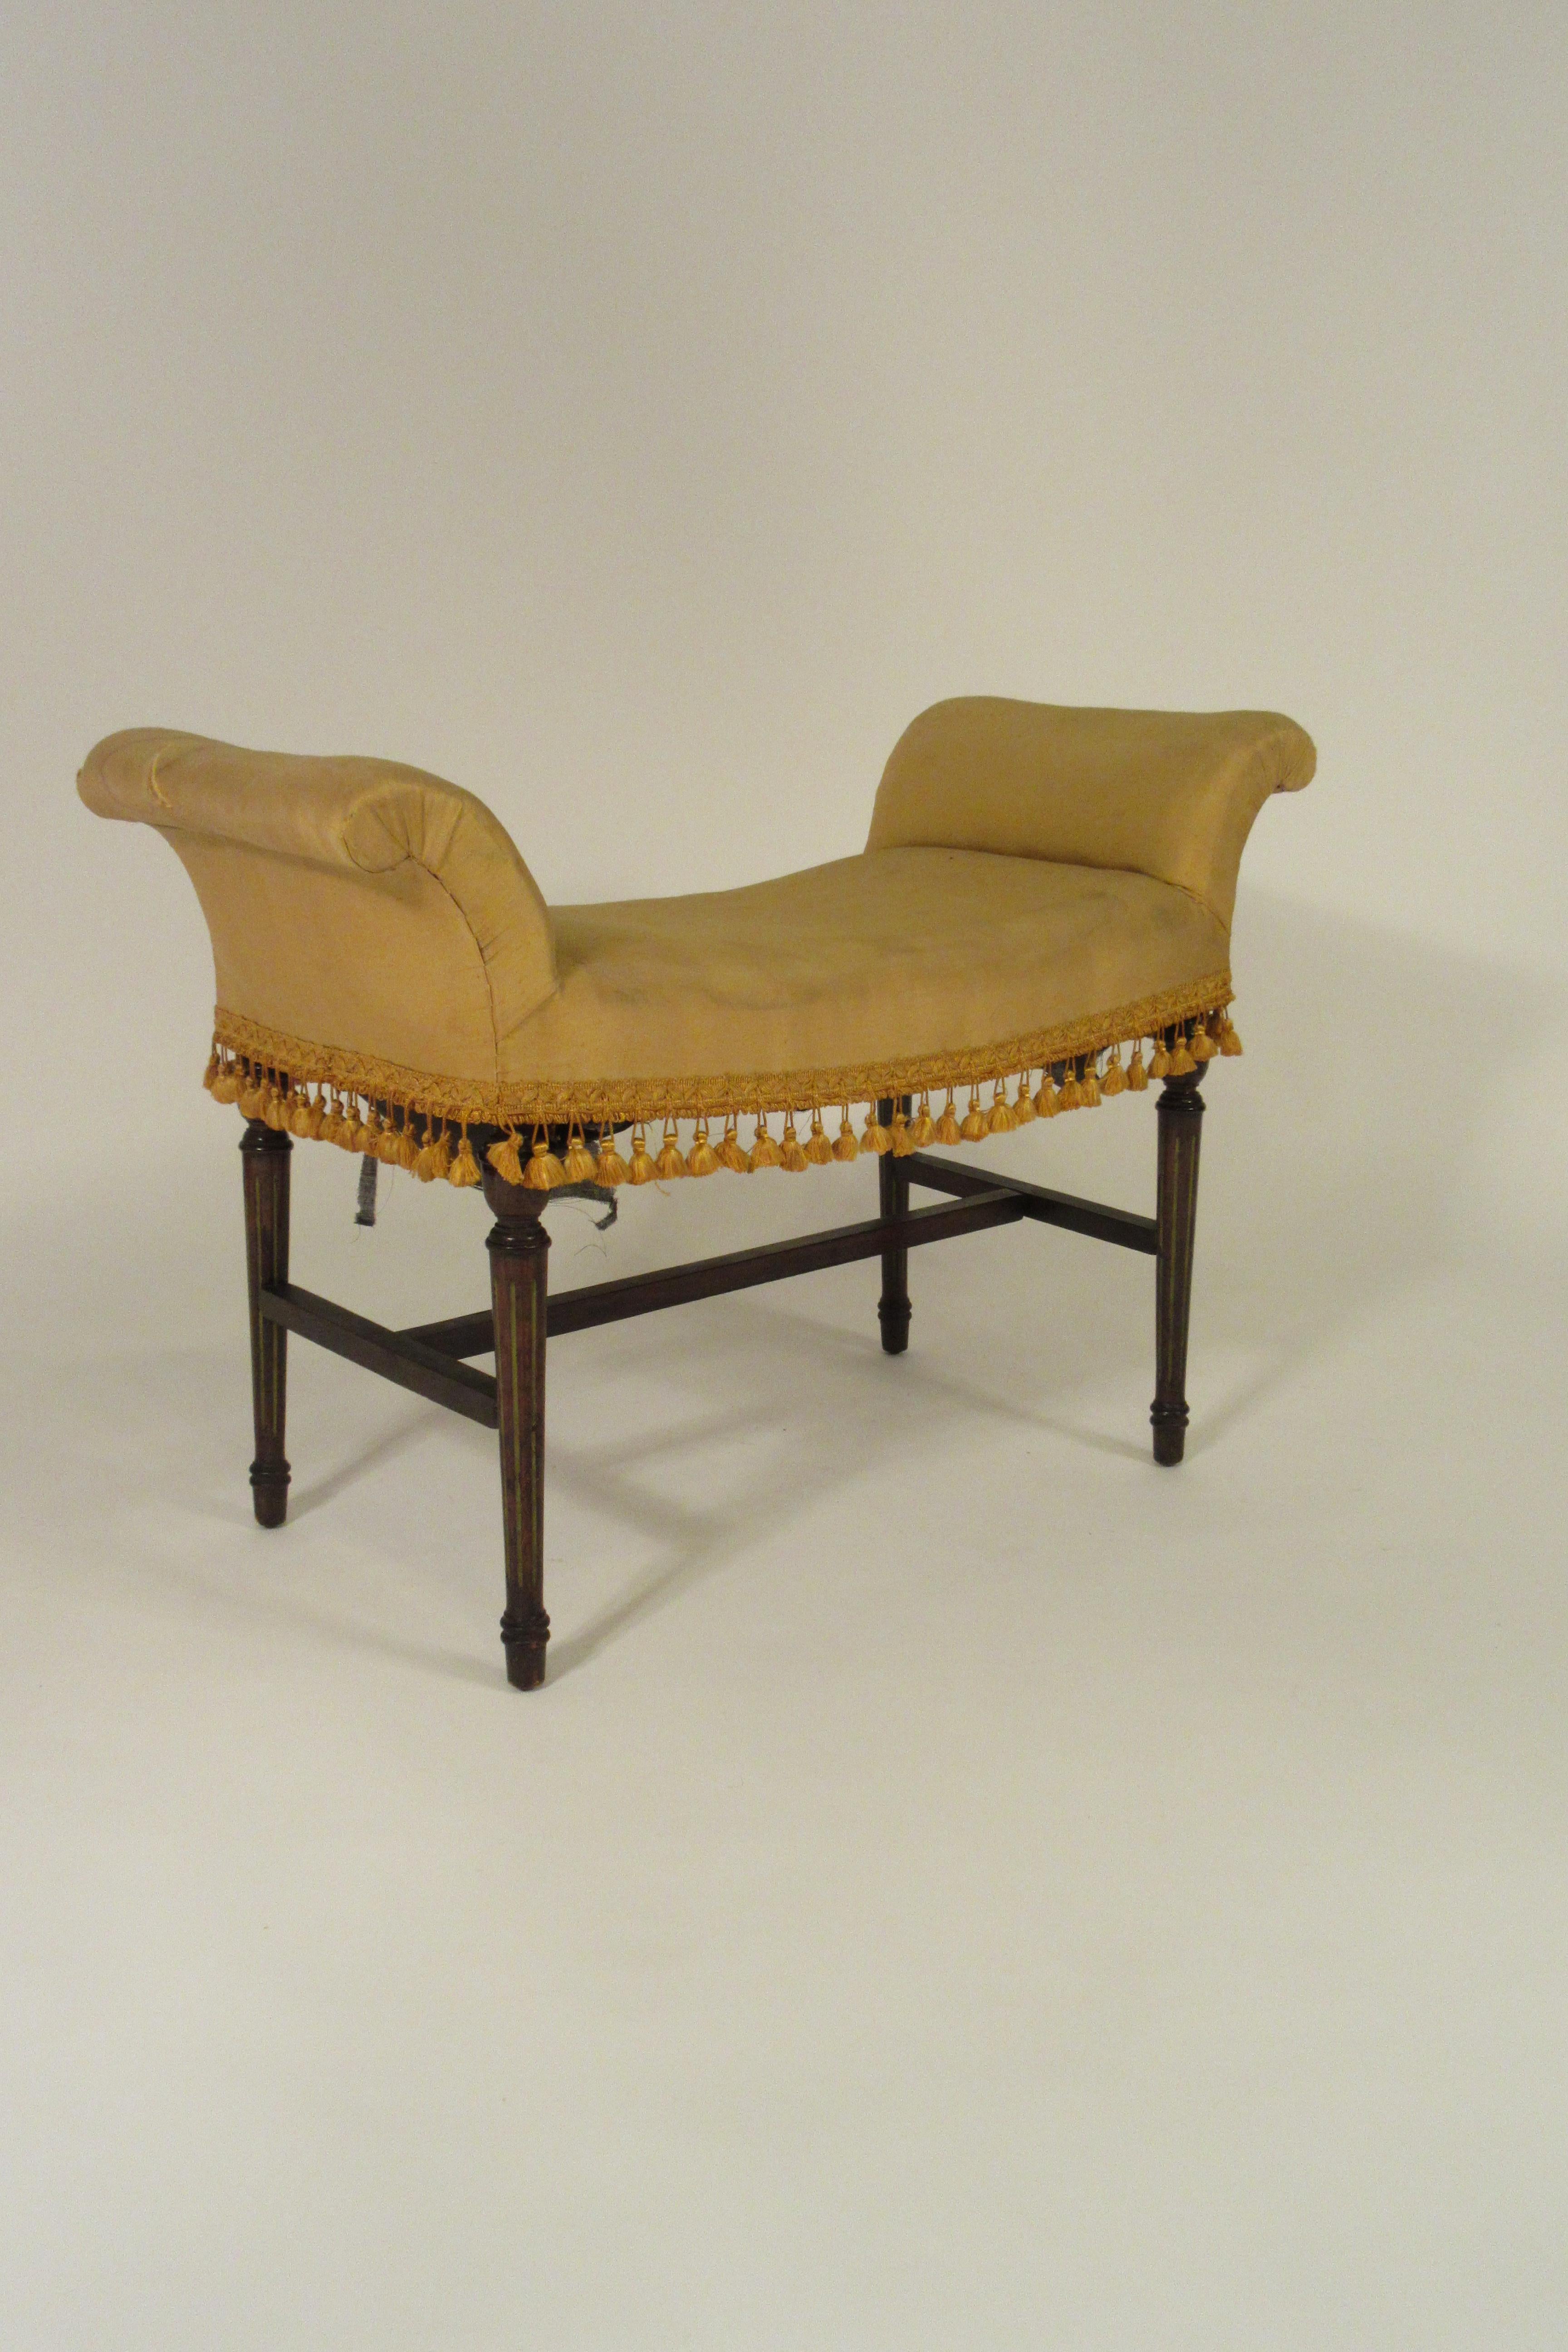 1920s Scrolled Arm Bench 1